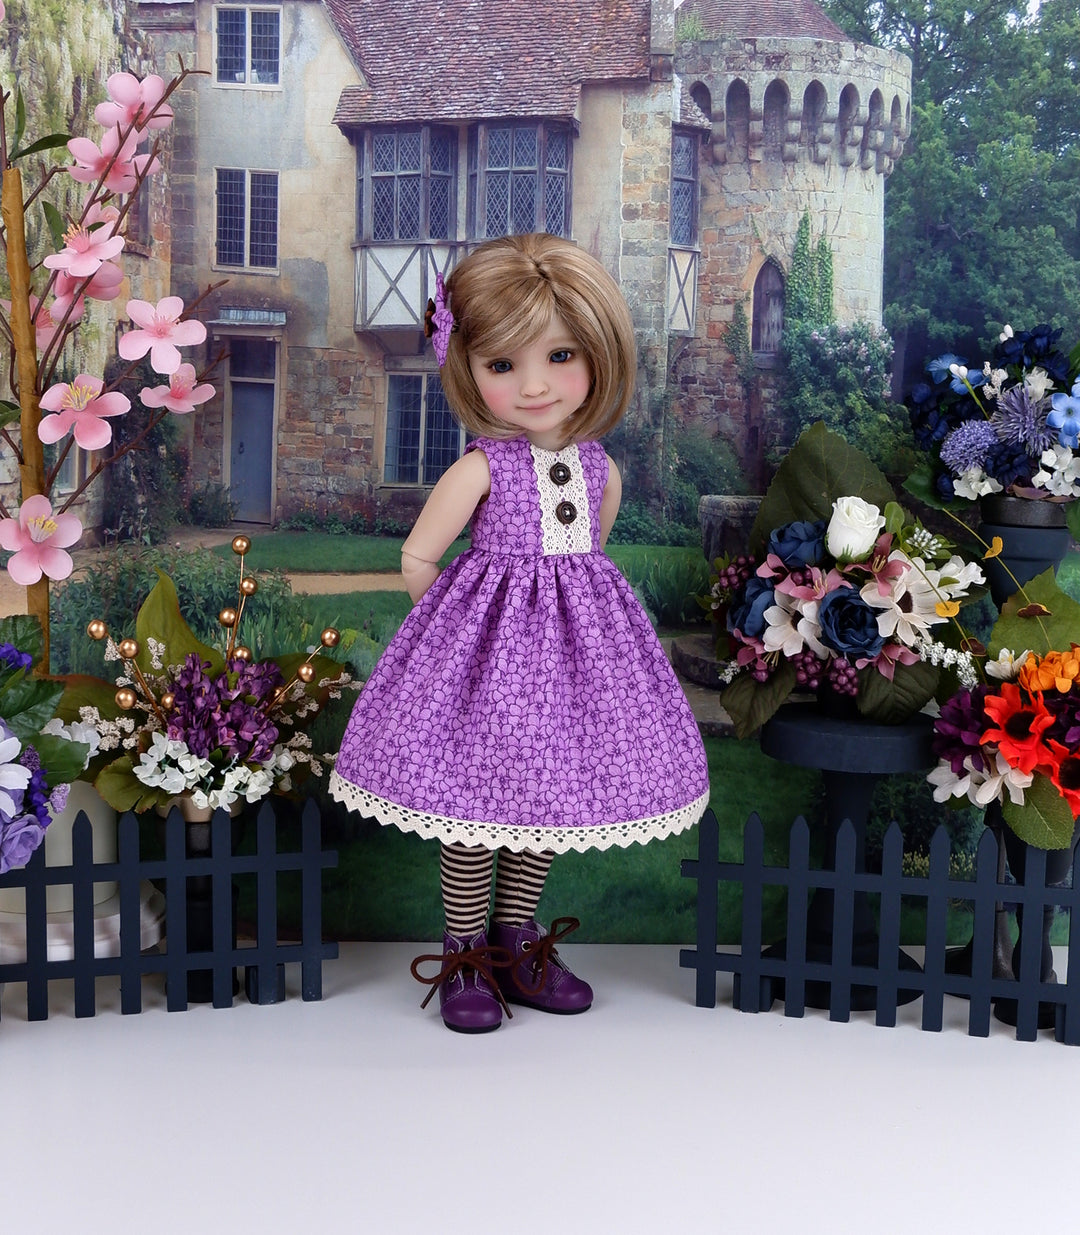 Autumn Violas - dress and sweater with boots for Ruby Red Fashion Friends doll